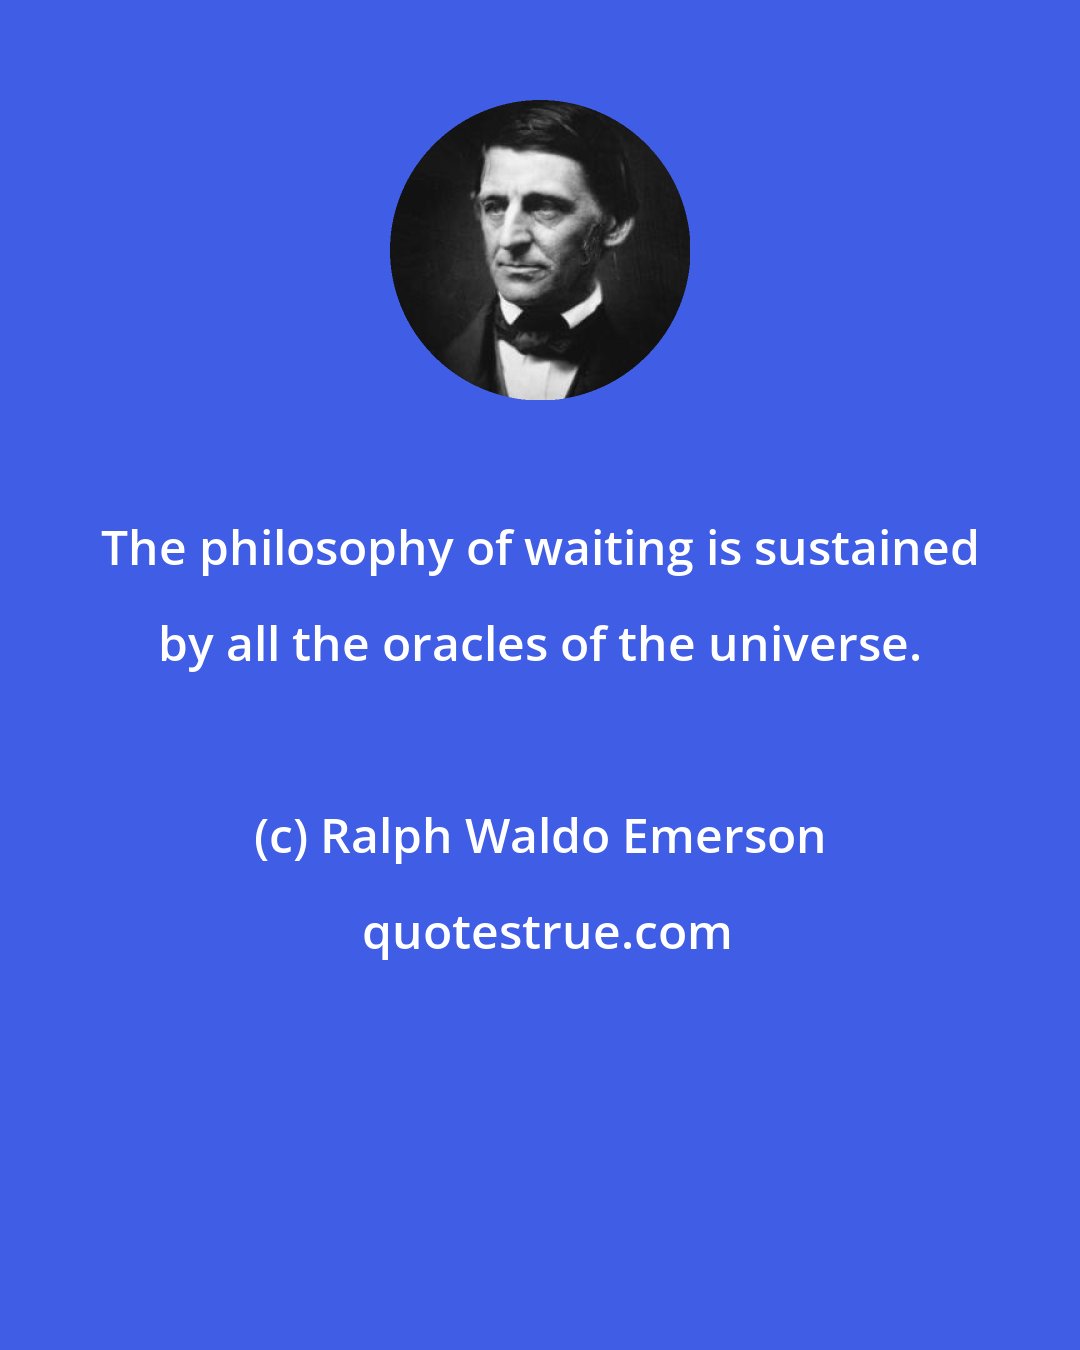 Ralph Waldo Emerson: The philosophy of waiting is sustained by all the oracles of the universe.